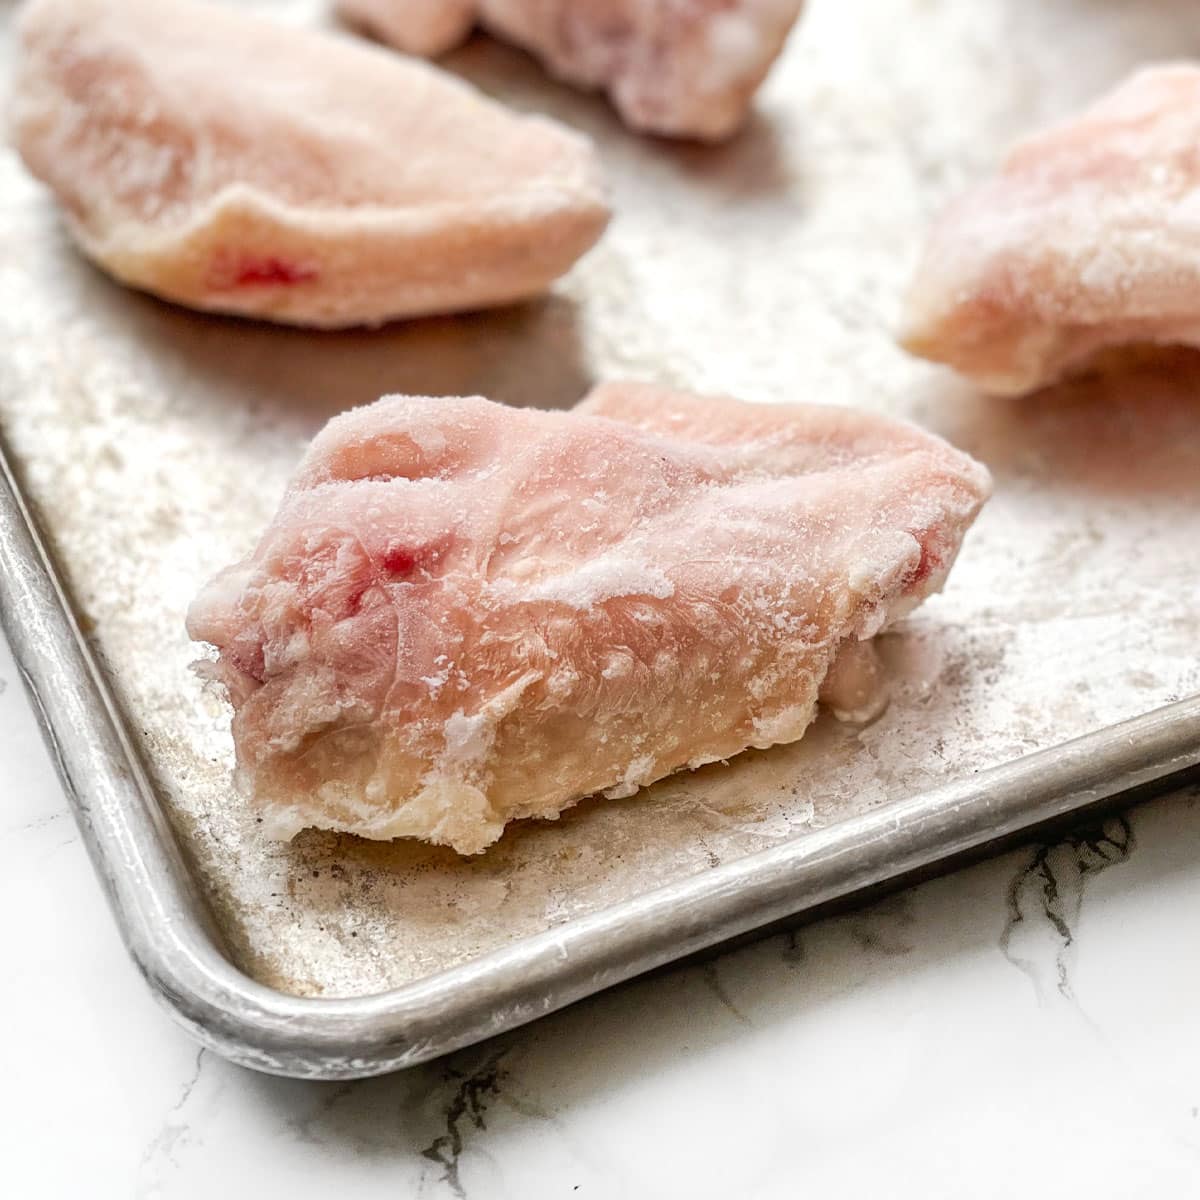 Uncooked First and Second Section Frozen Chicken Party Wings